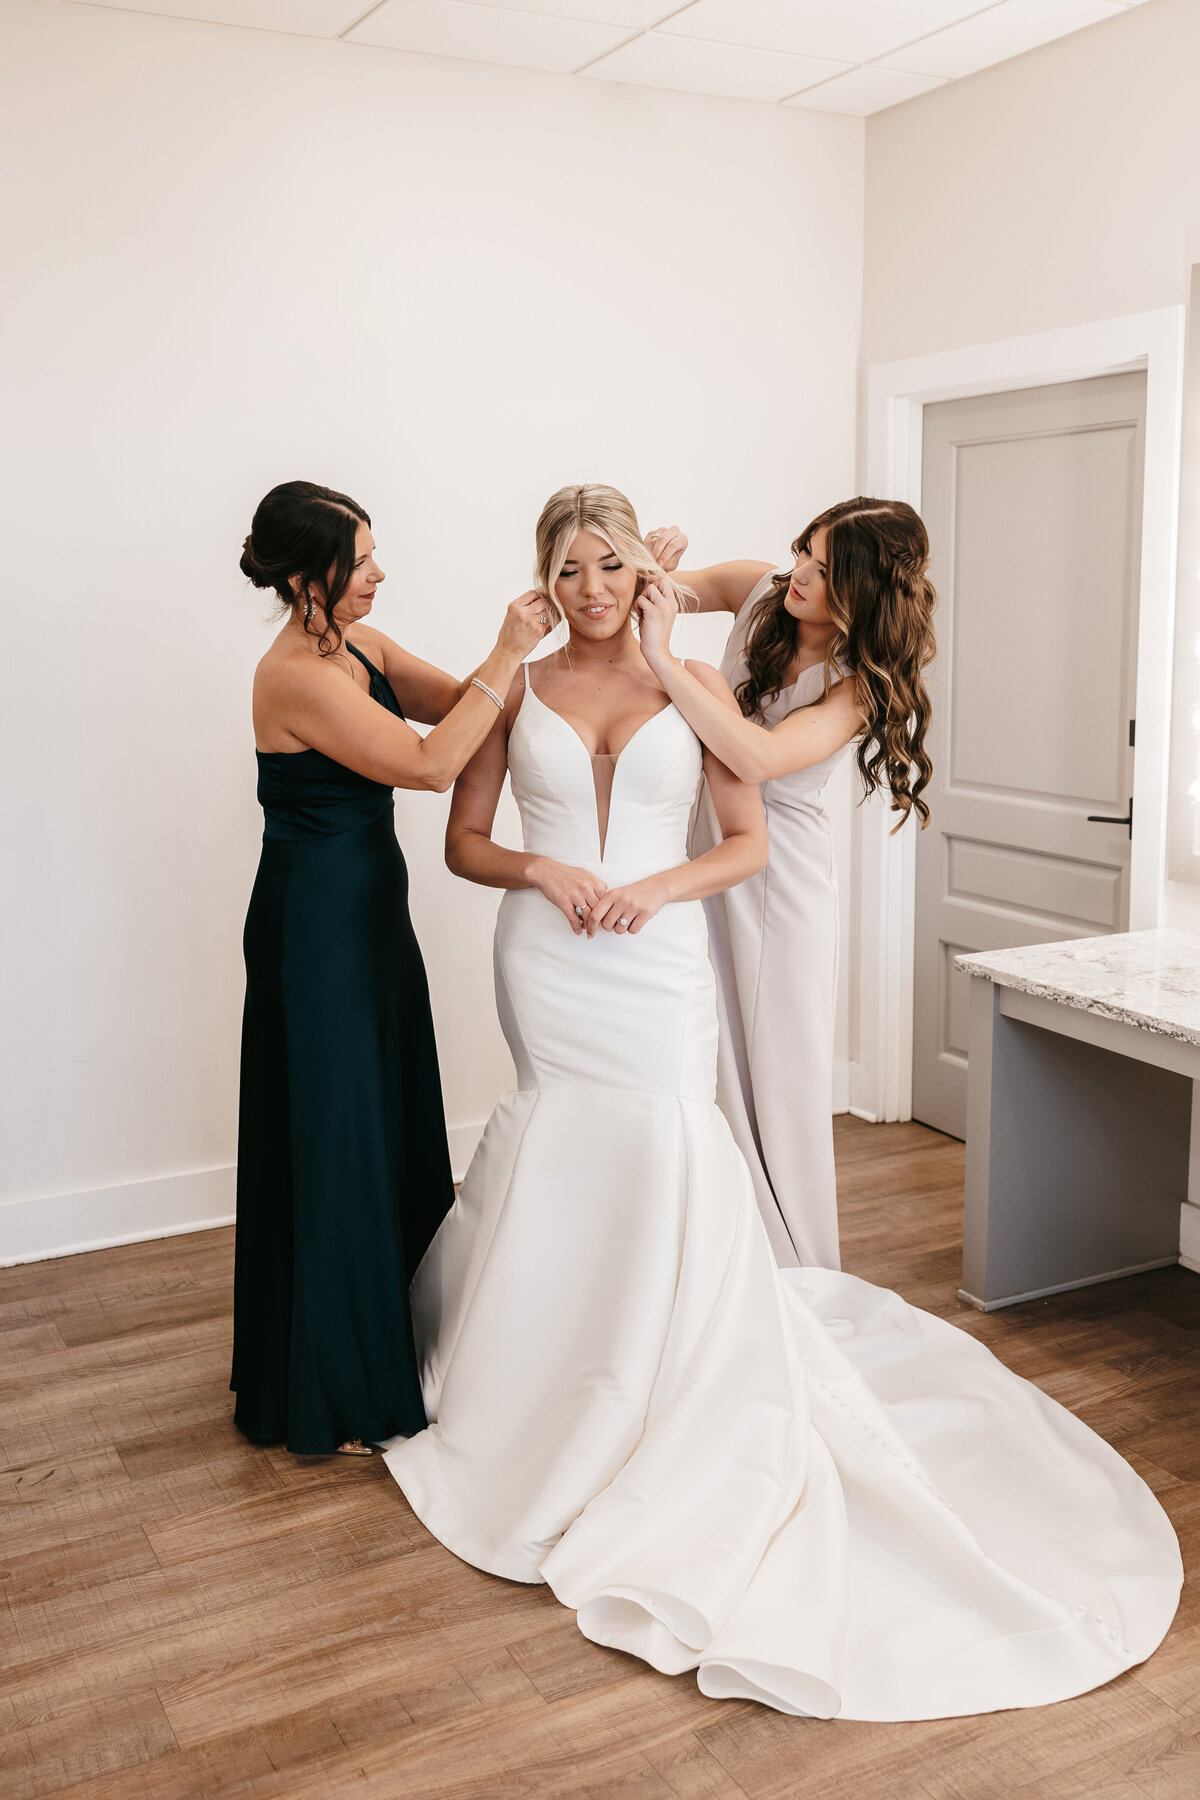 Sister and Mother helping bride get ready